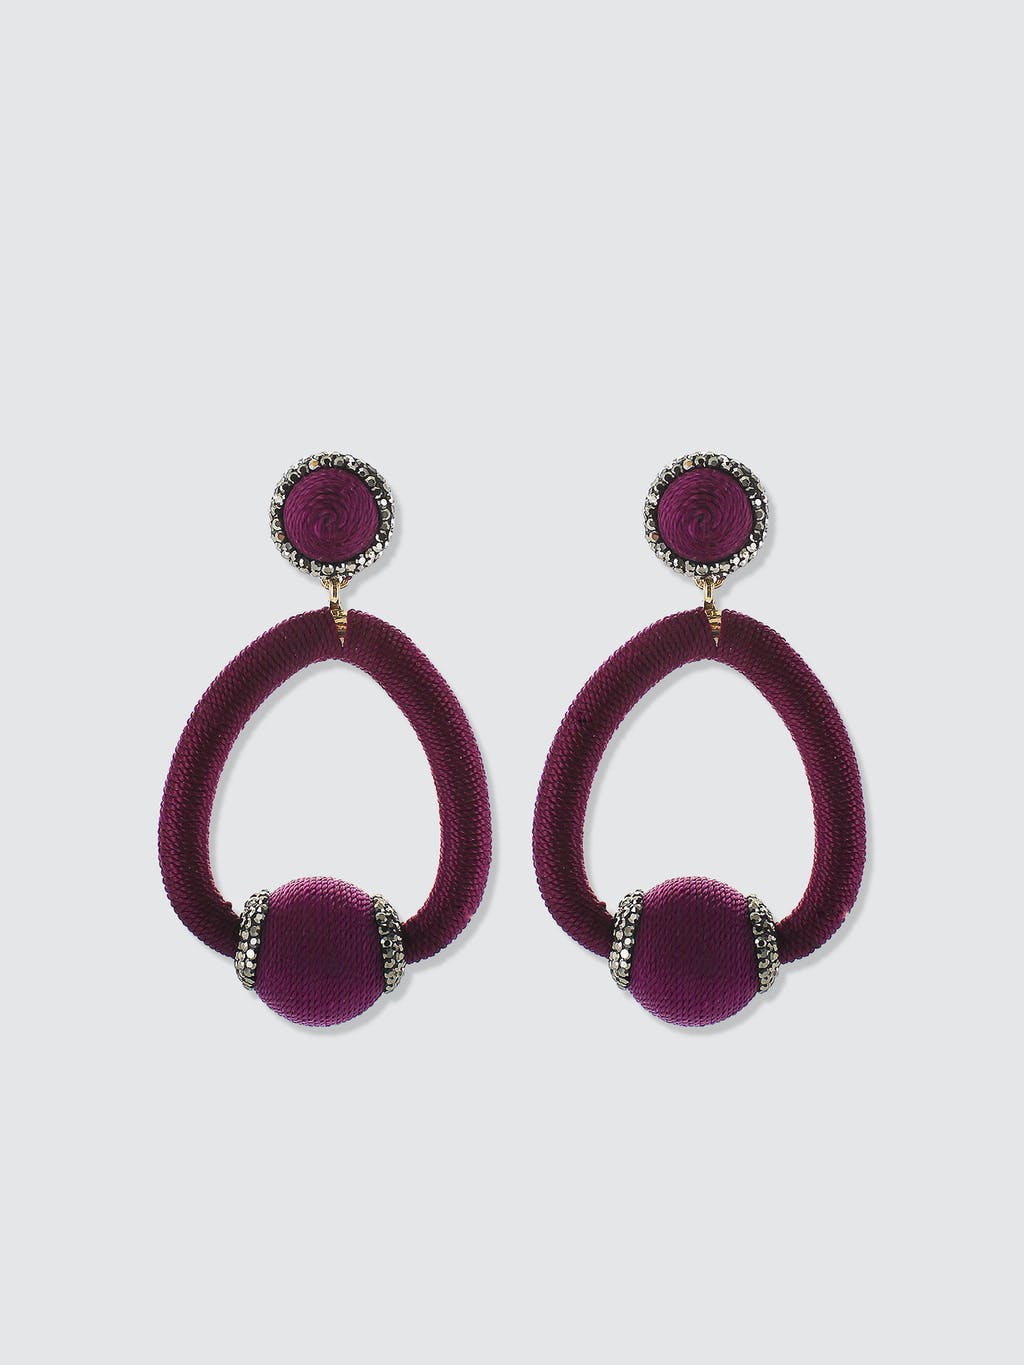 Lux and Burgundy Post Earrings